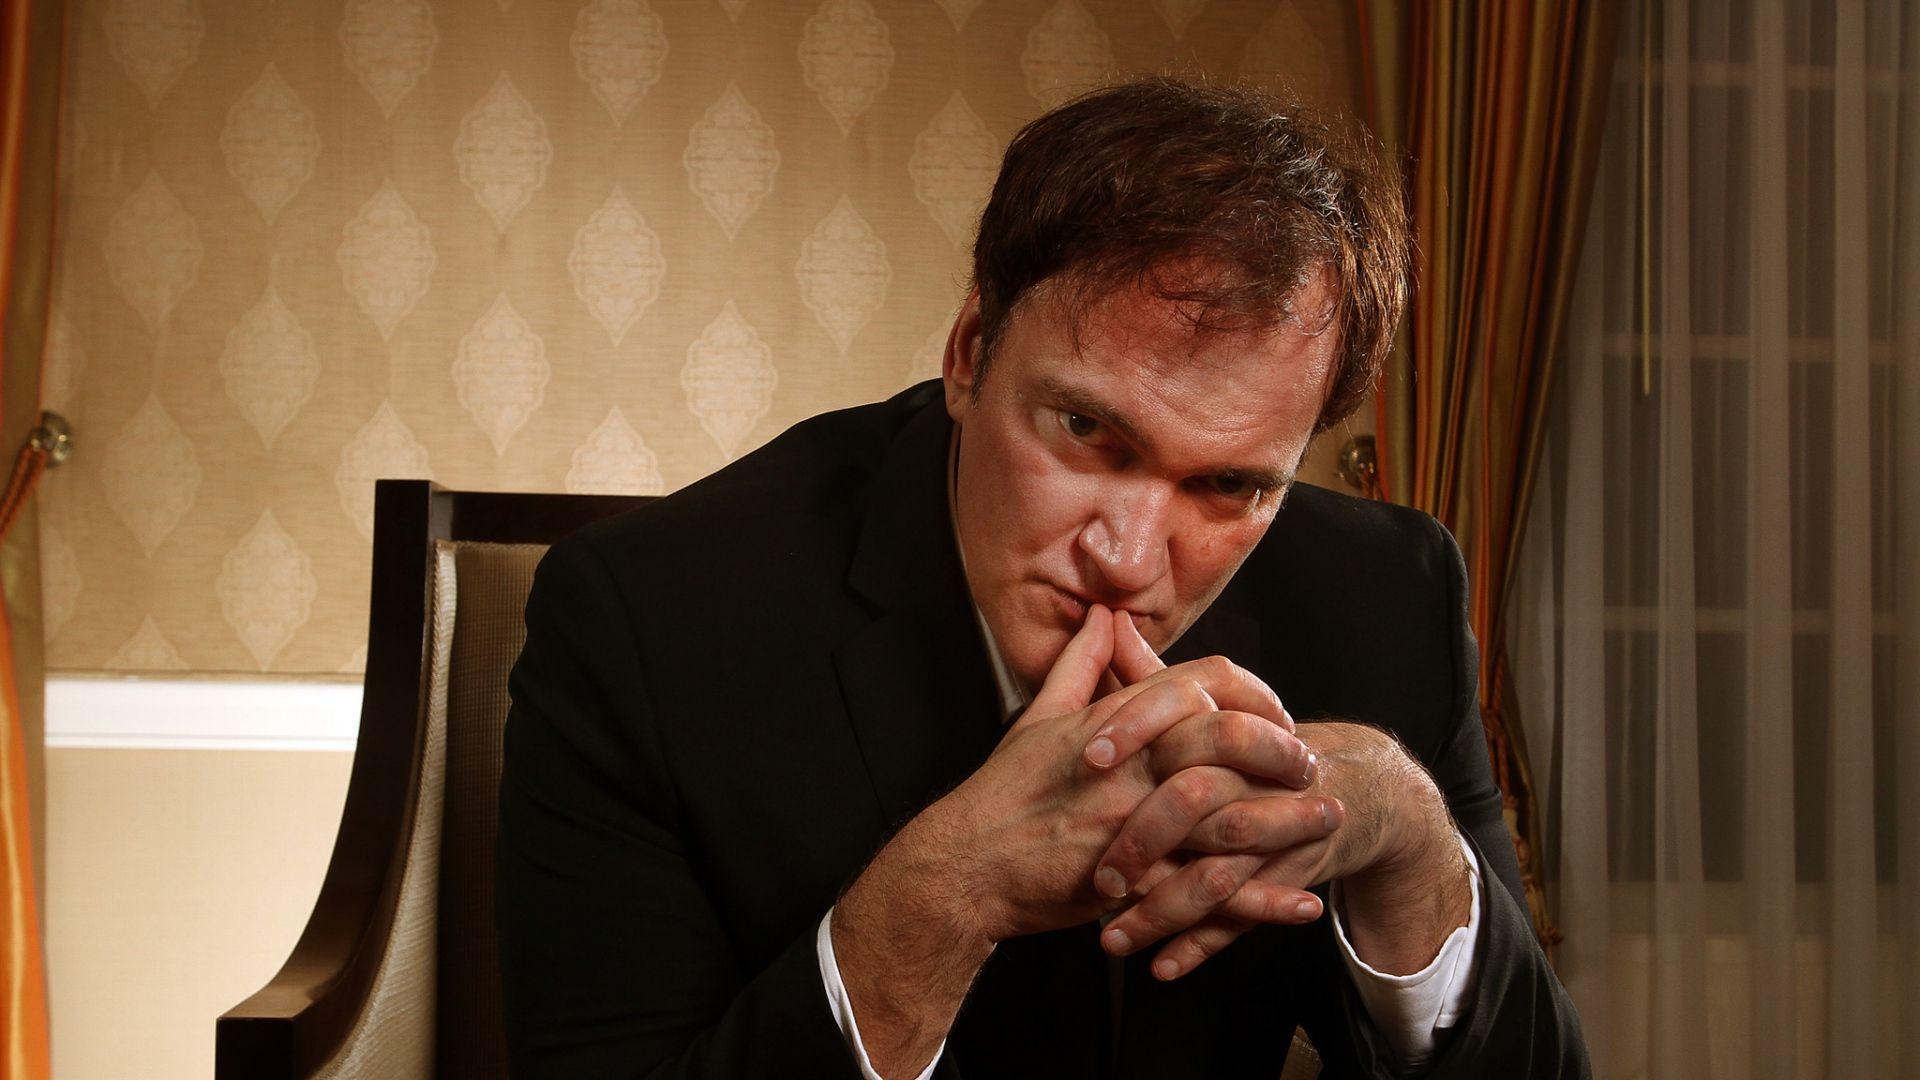 Tarantino Reportedly Approaching A List Actors For New Movie Based